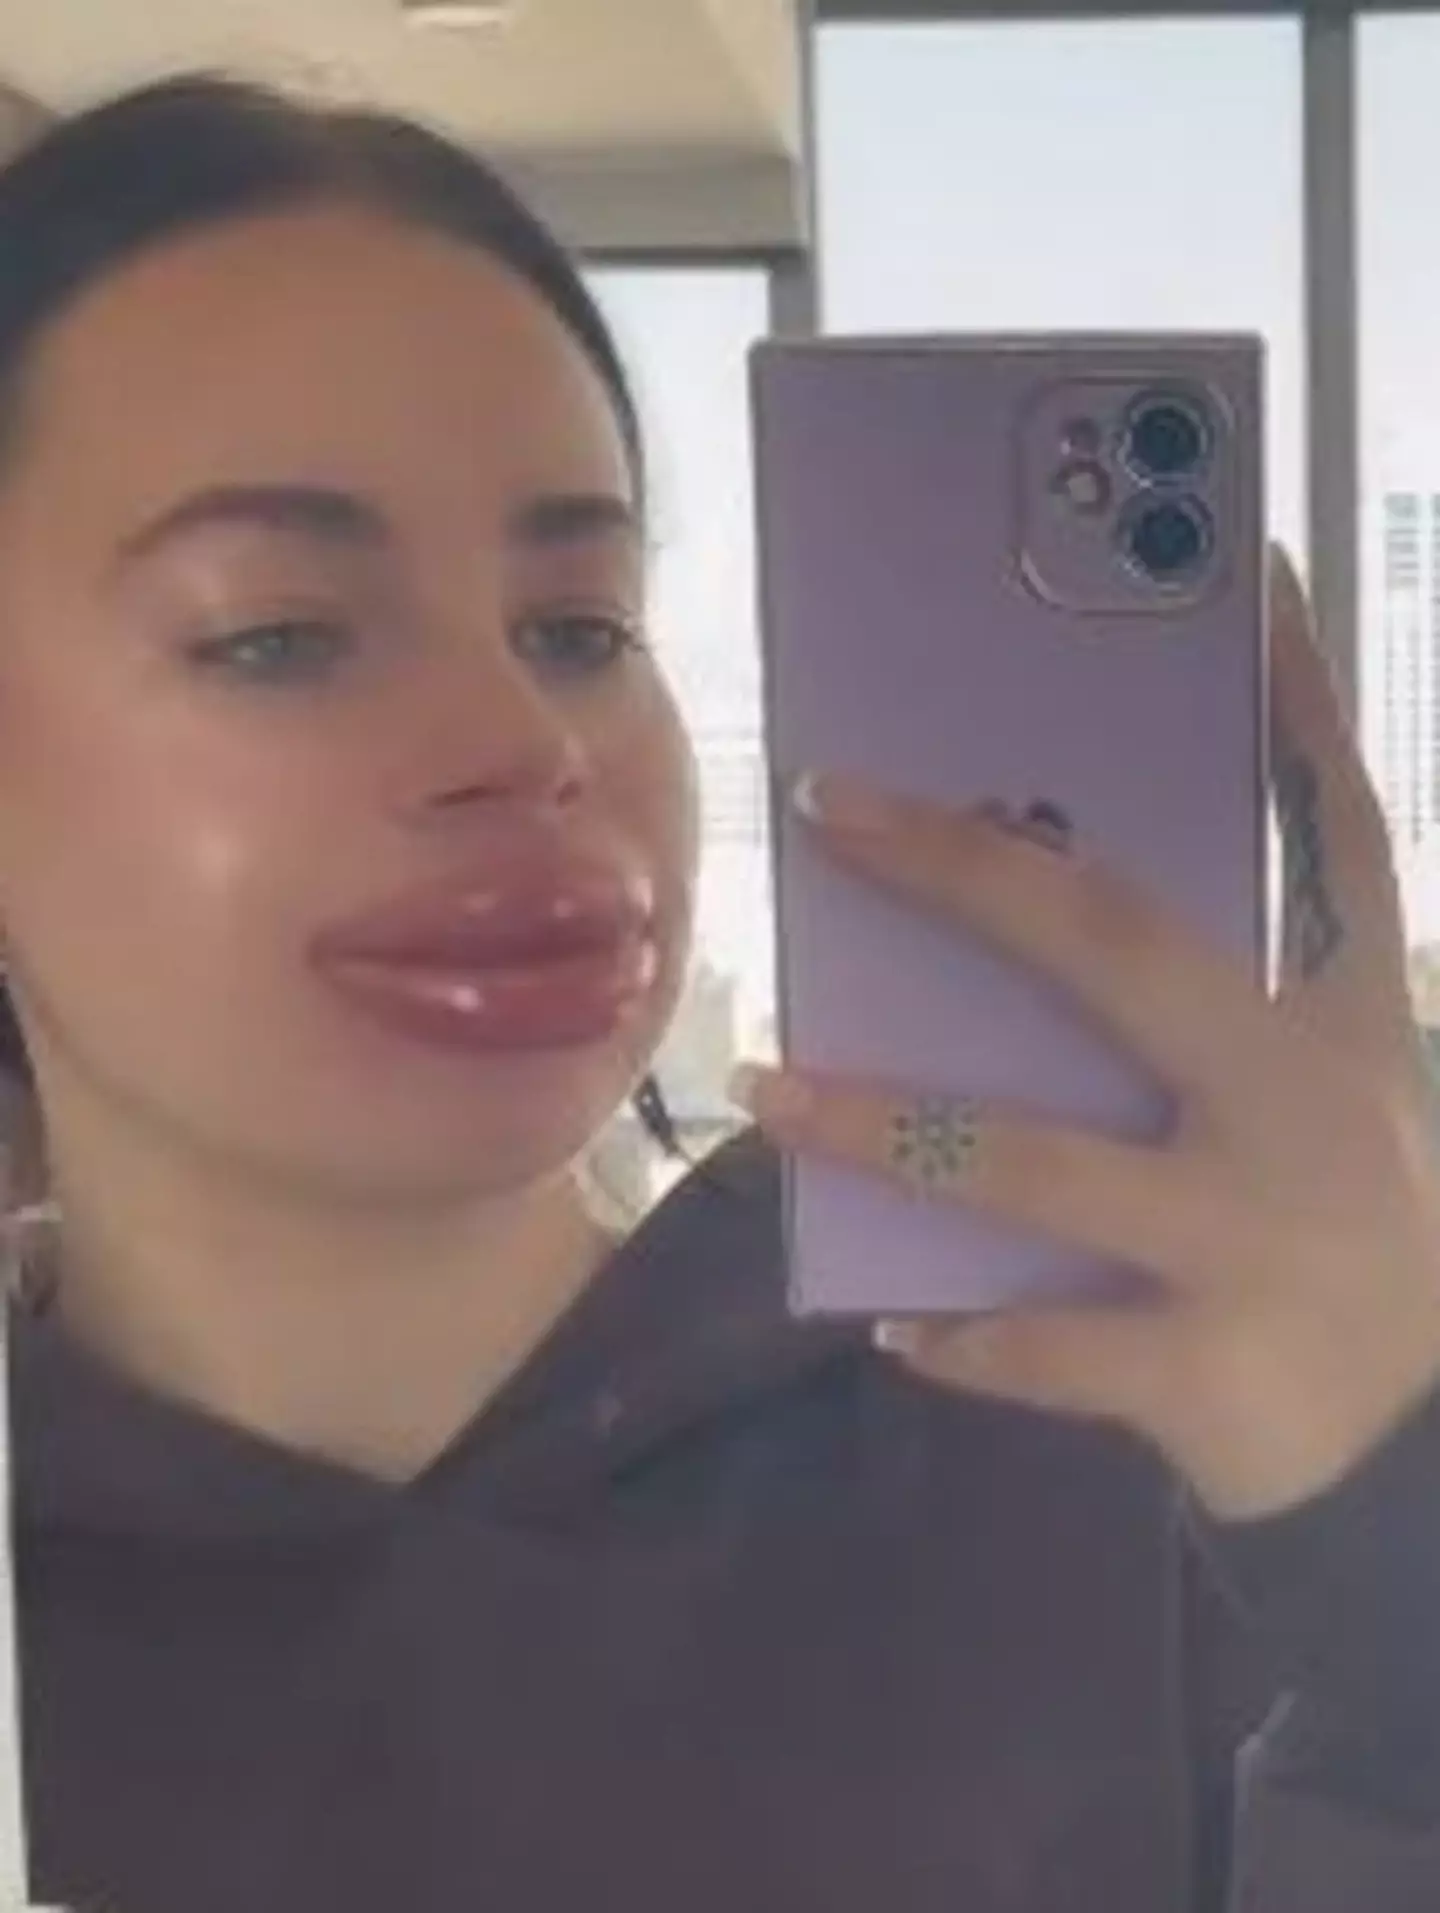 She said it won't stop her from getting her lips done in future.